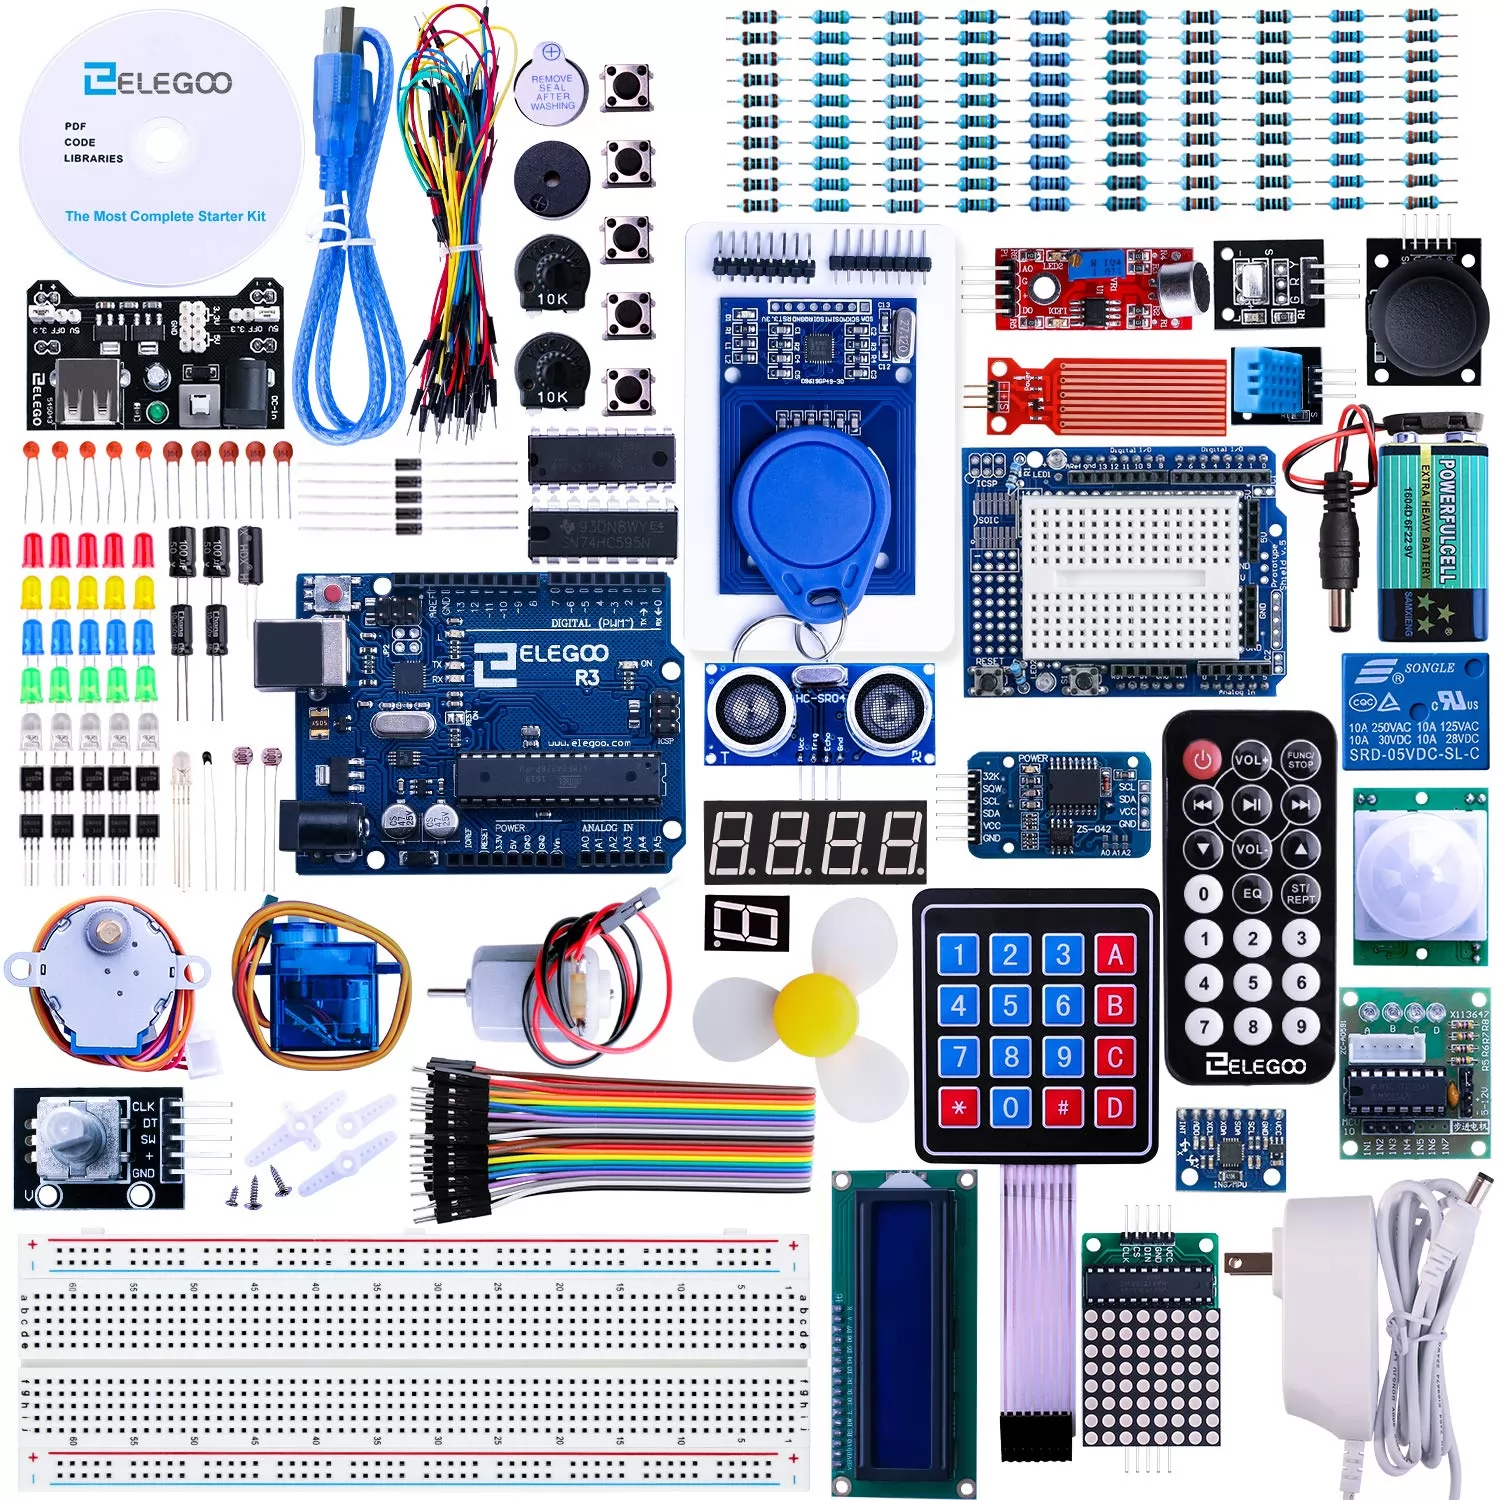 ELEGOO Arduino UNO R3 Project Most Complete Starter Kit w/Tutorial Compatible with Arduino IDE (63 Items)